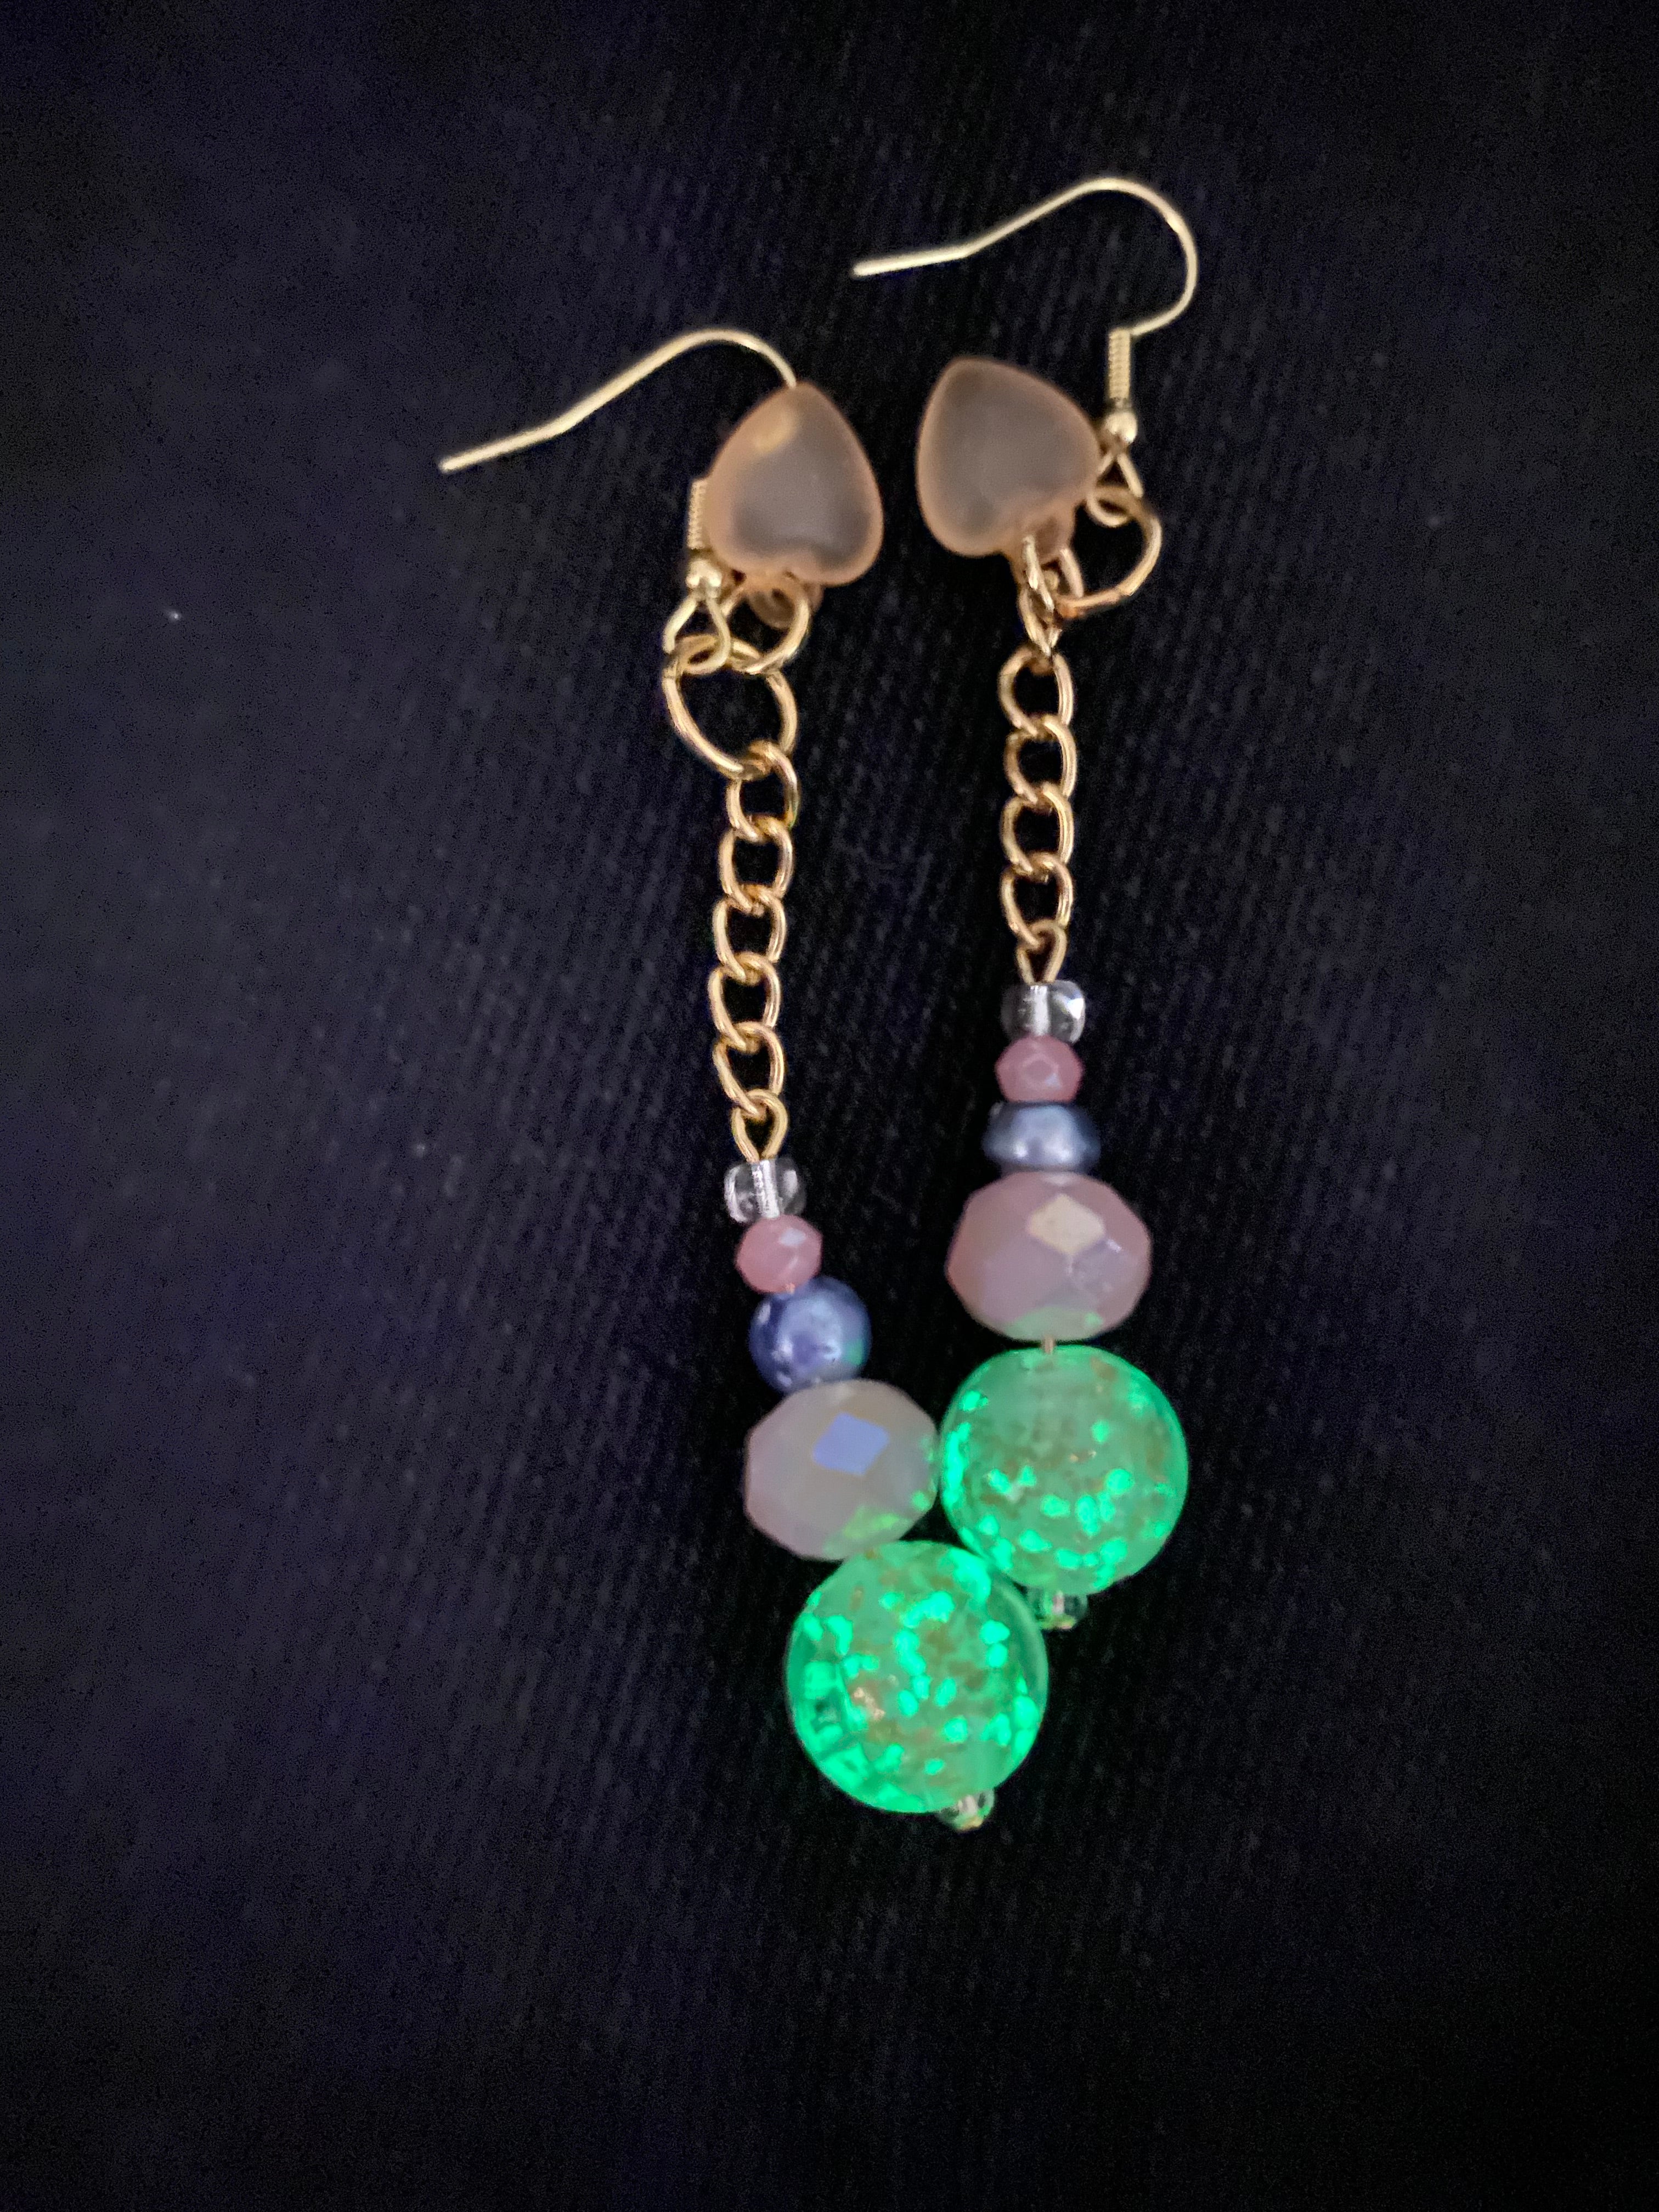 Retro Sci Fi Chain and Pink Planet Earrings